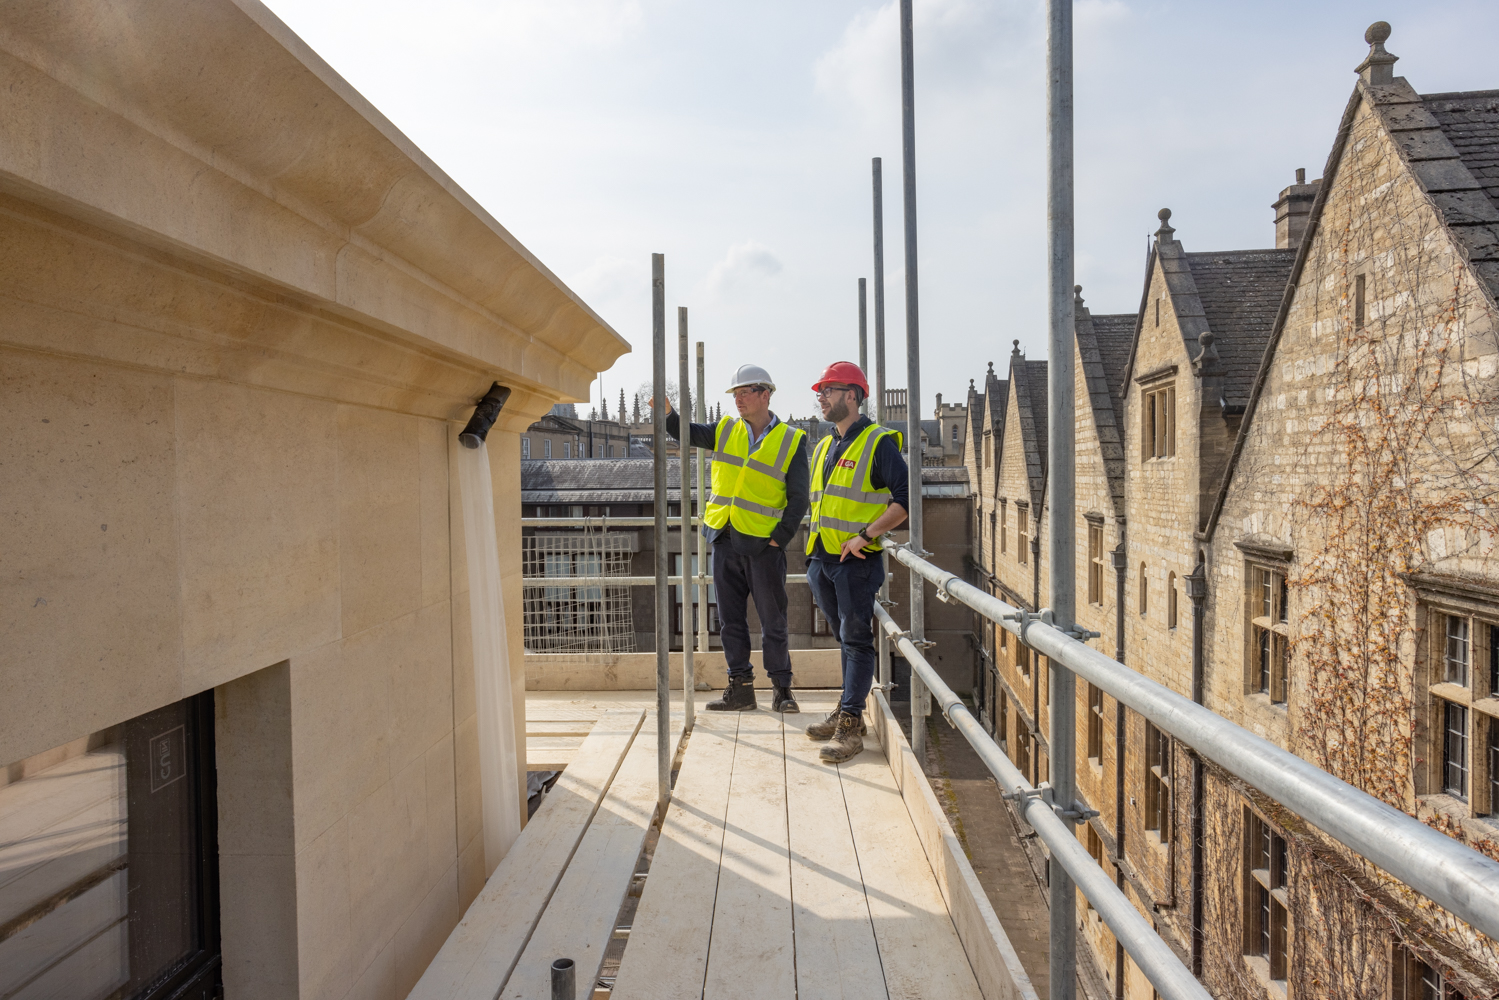 Milestone reached for Trinity College Oxford residential development